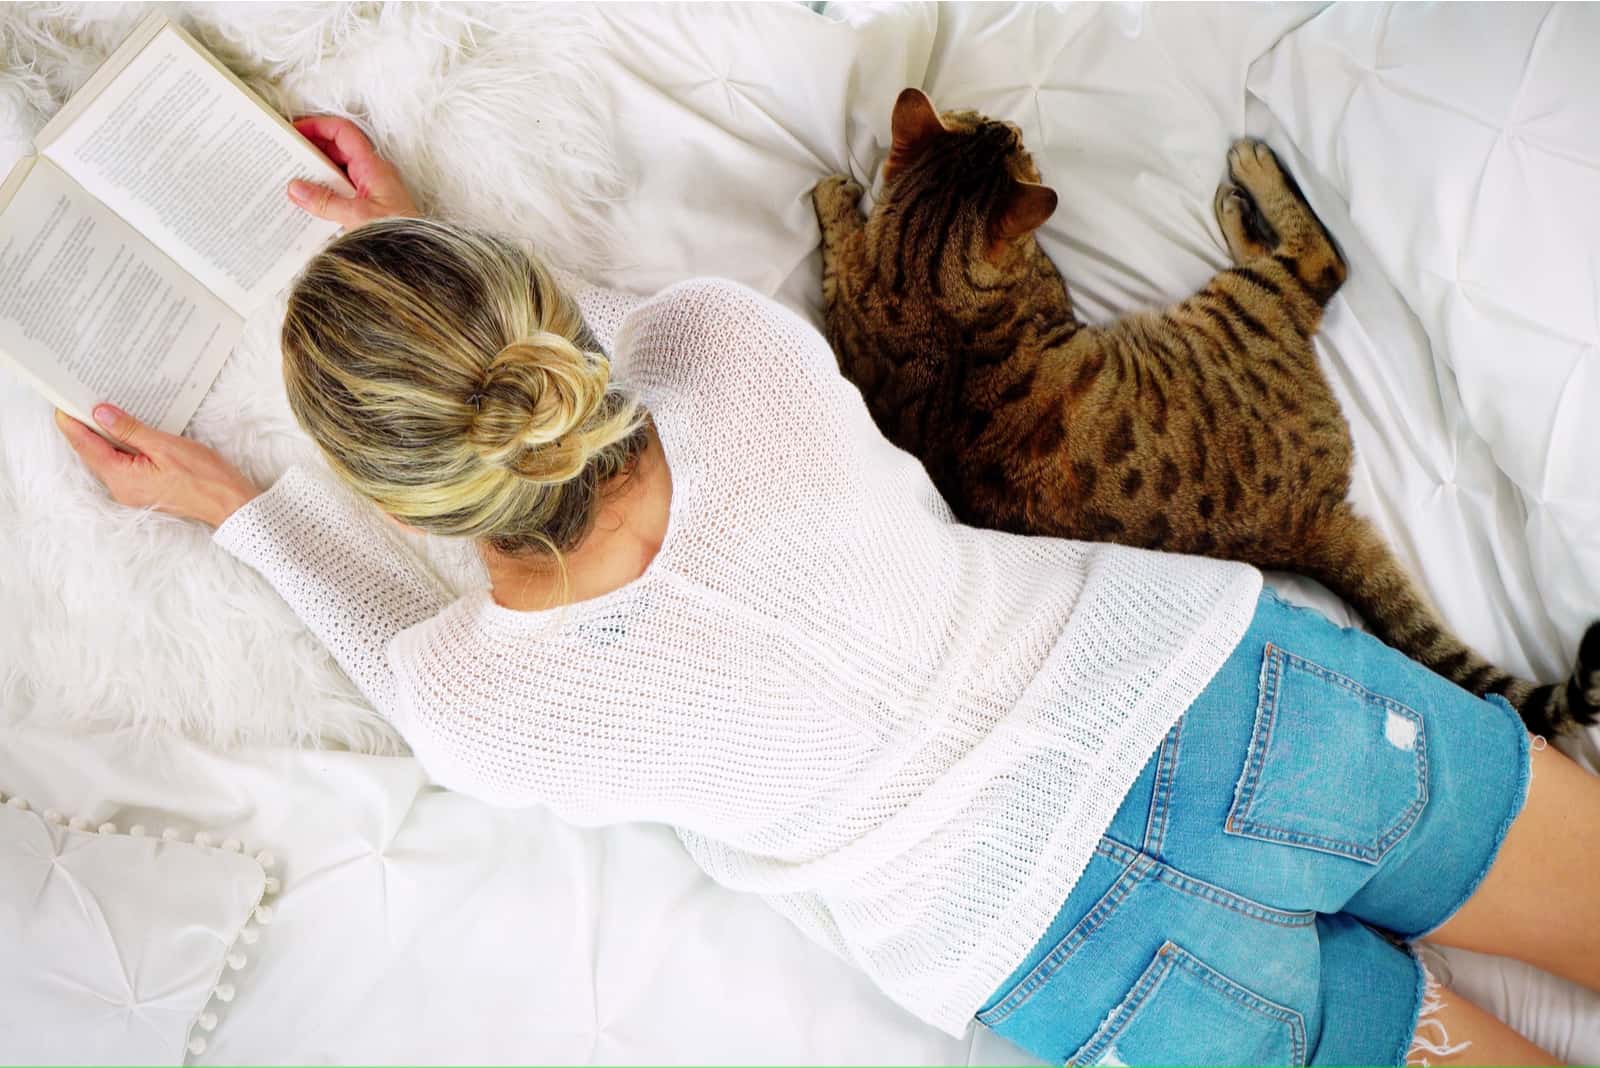 a woman lies with a cat and reads a book